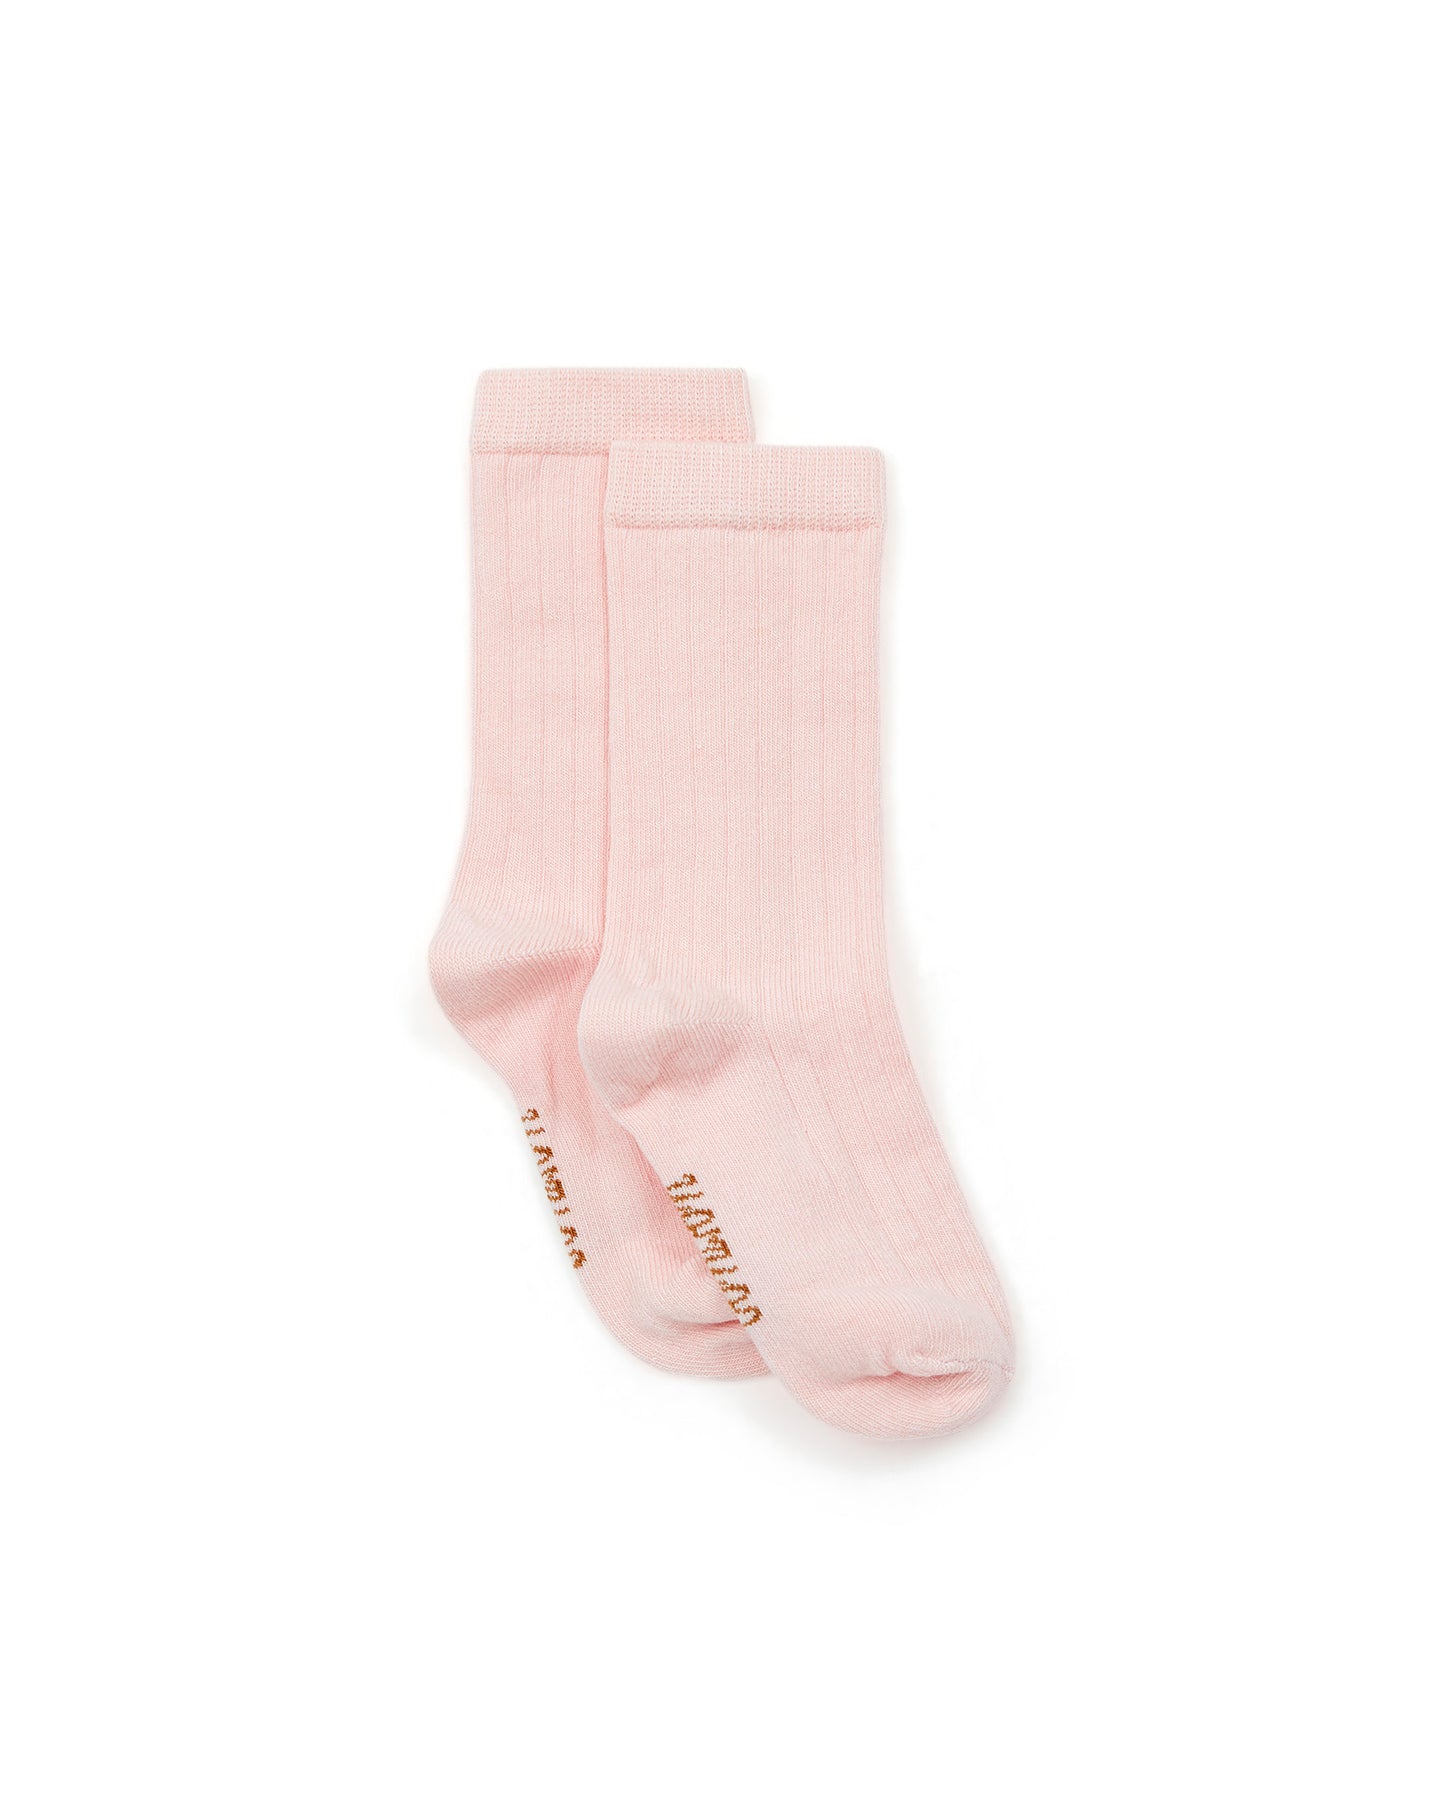 Chaussette - rose coquillage fille